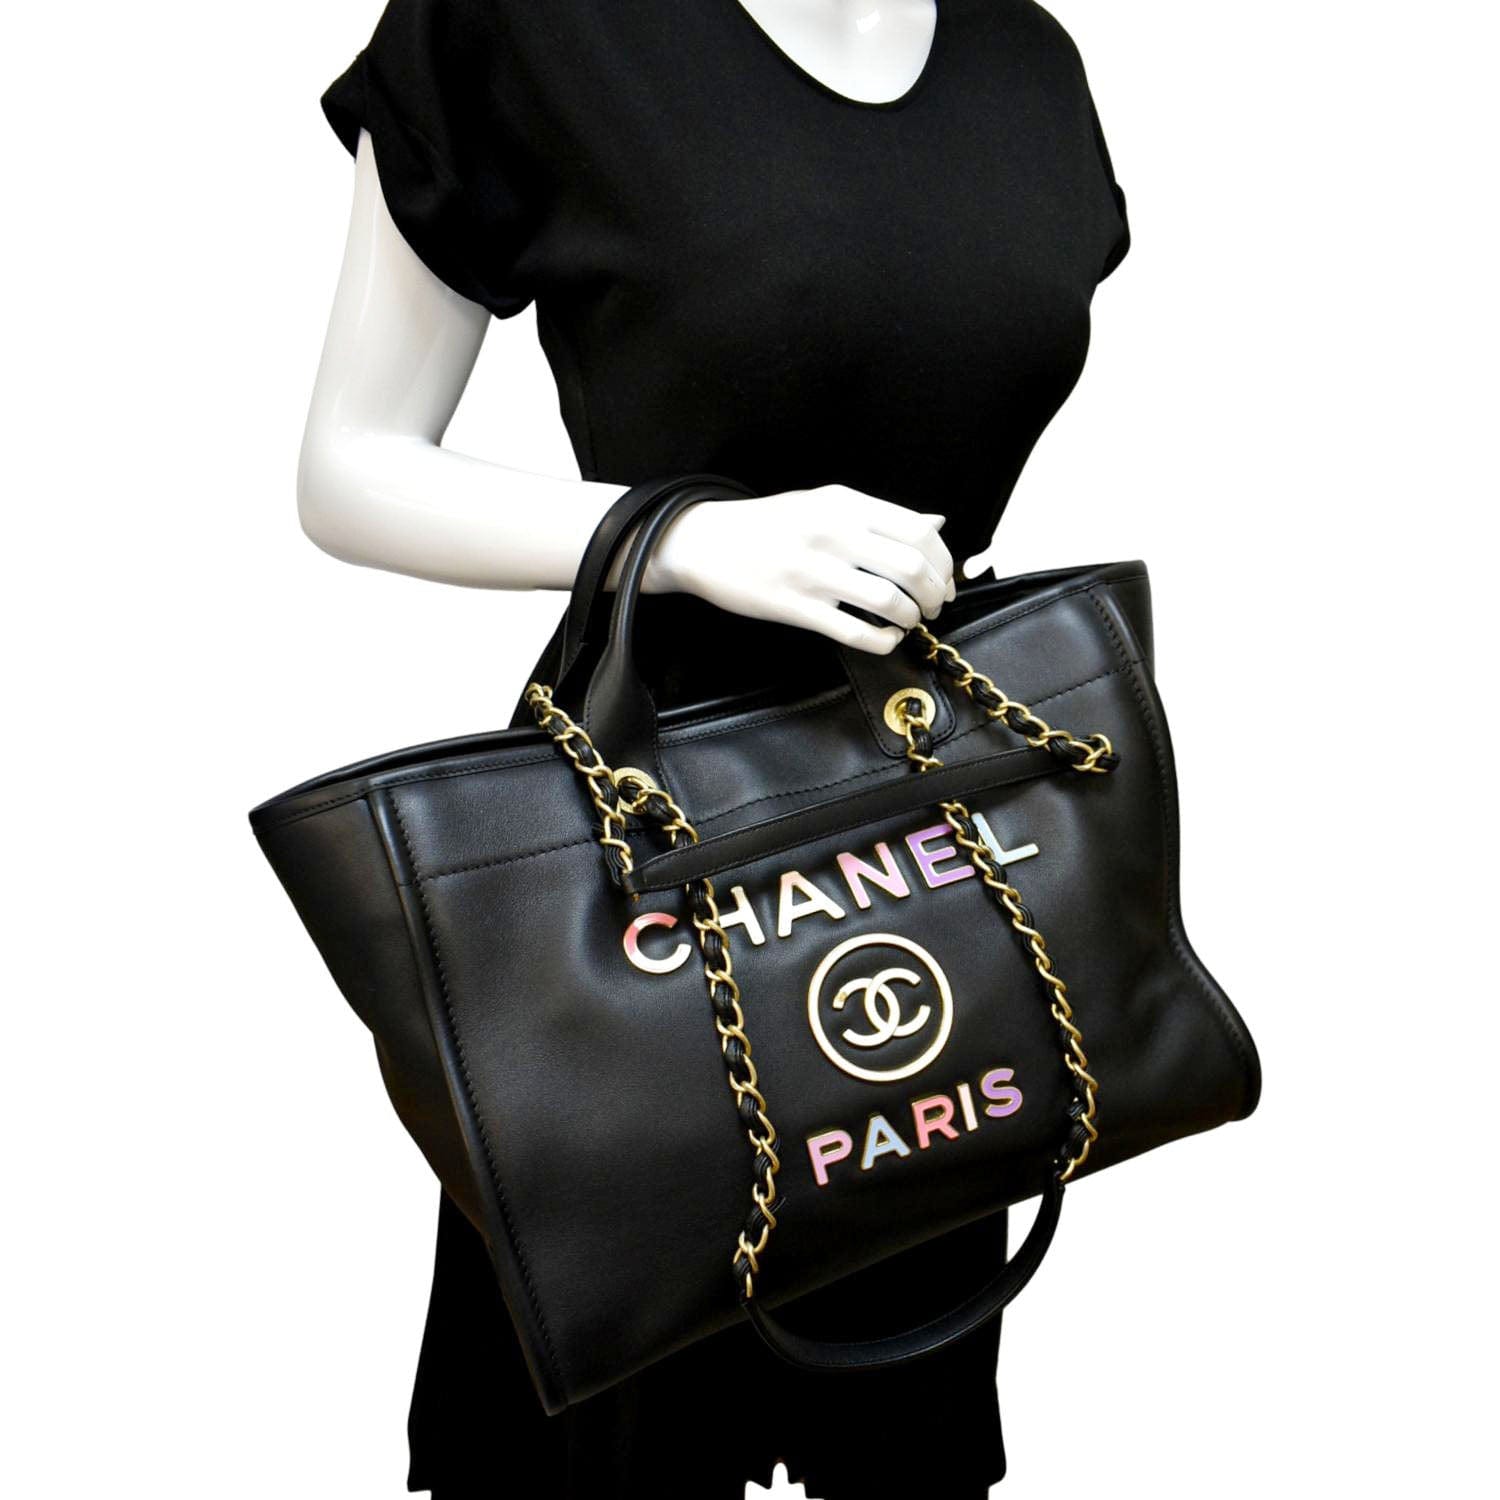 The Vintage Chanel Deauville Bag V's The Modern Deauville Tote